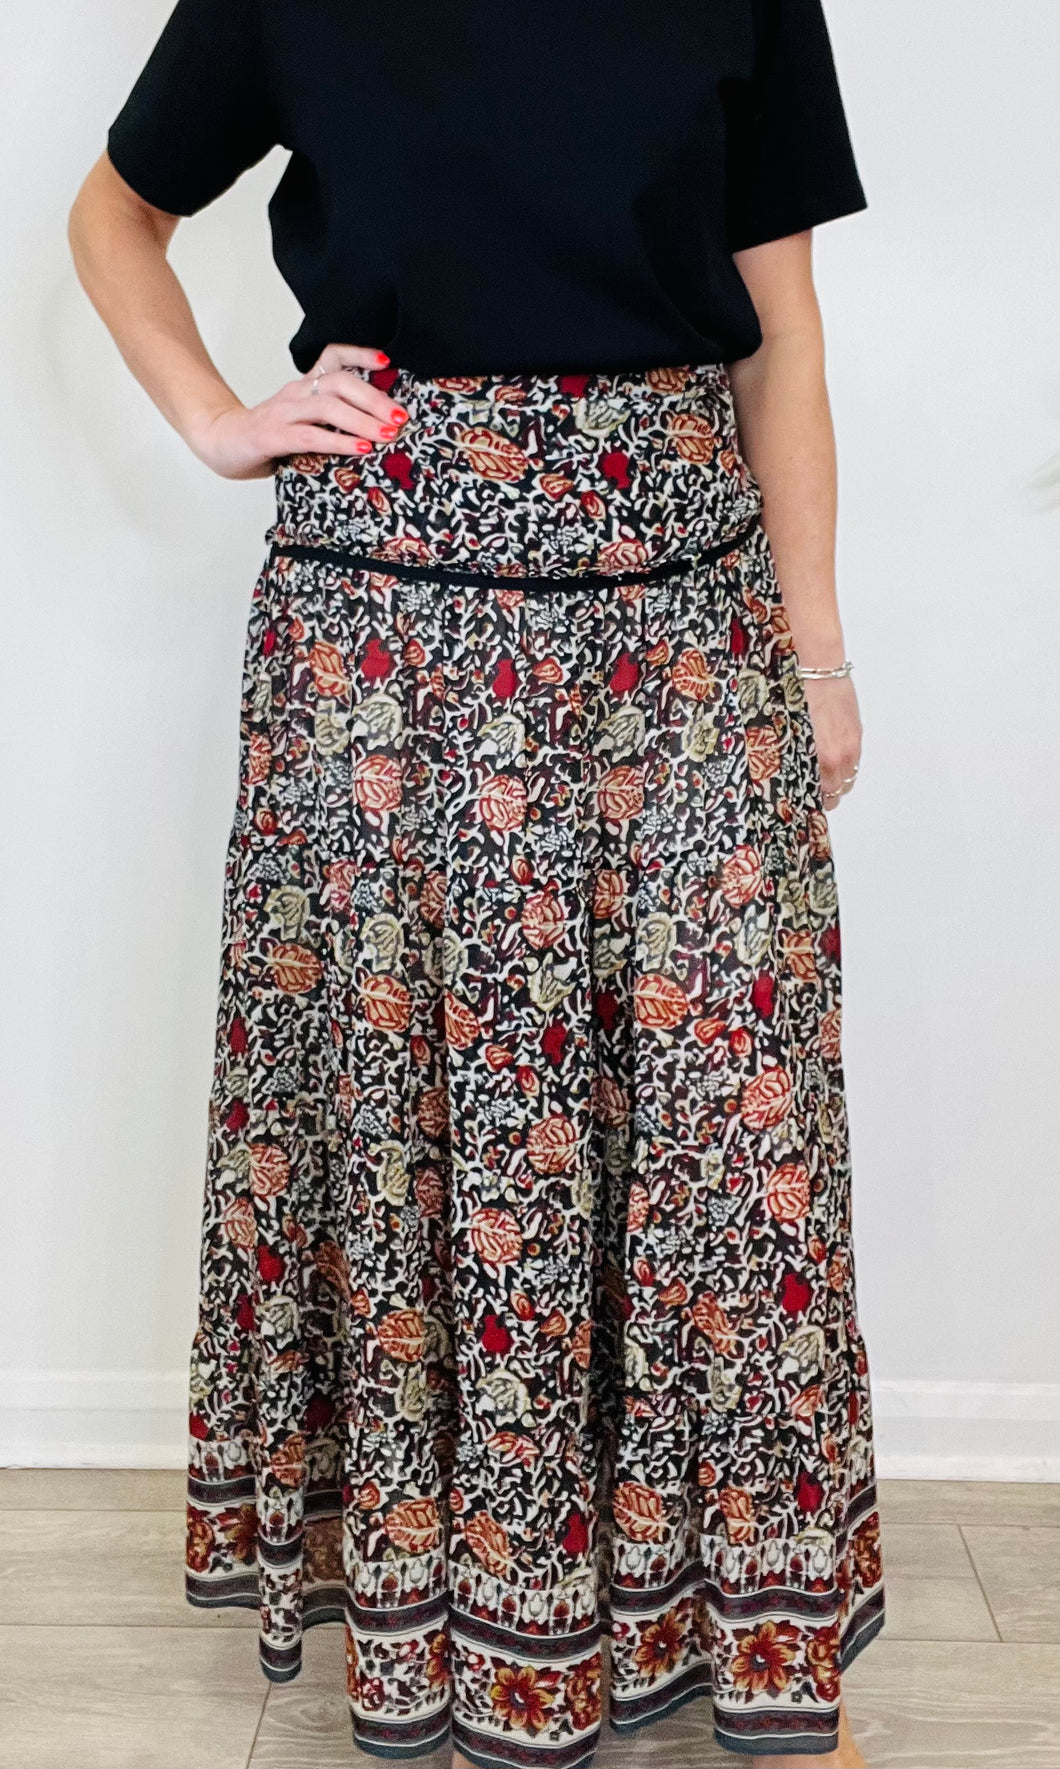 Patterned Maxi Skirt - Size 3